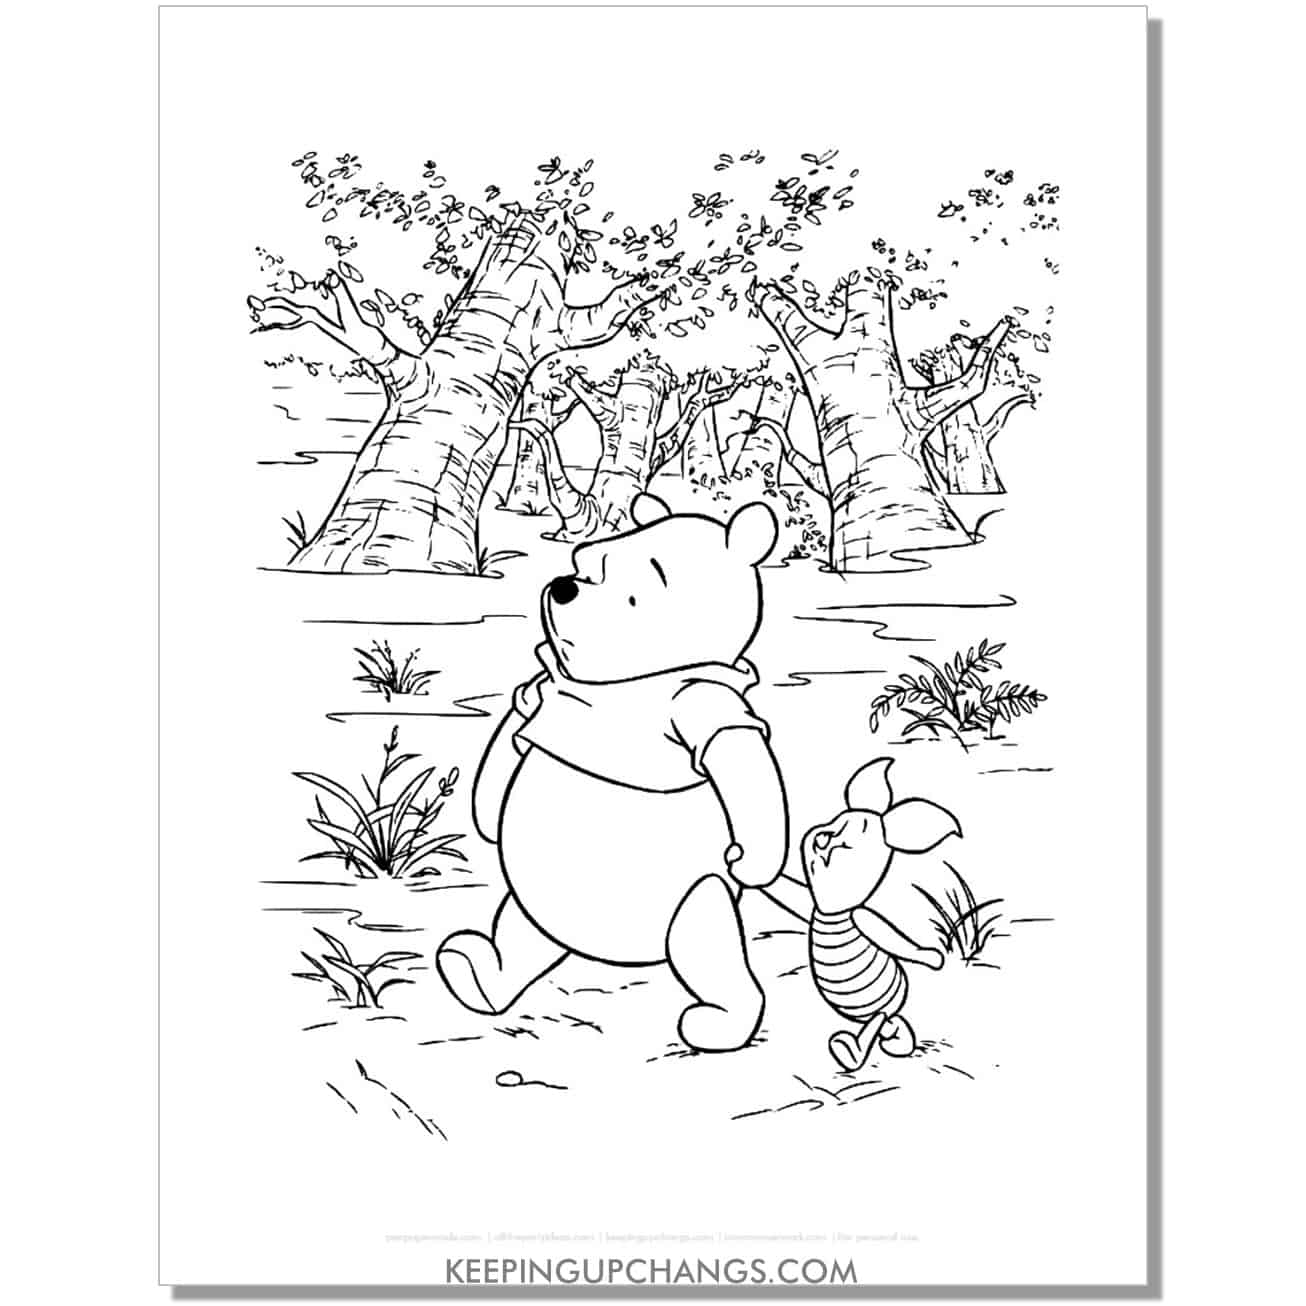 winnie the pooh and piglet walking among trees waving coloring page, sheet.